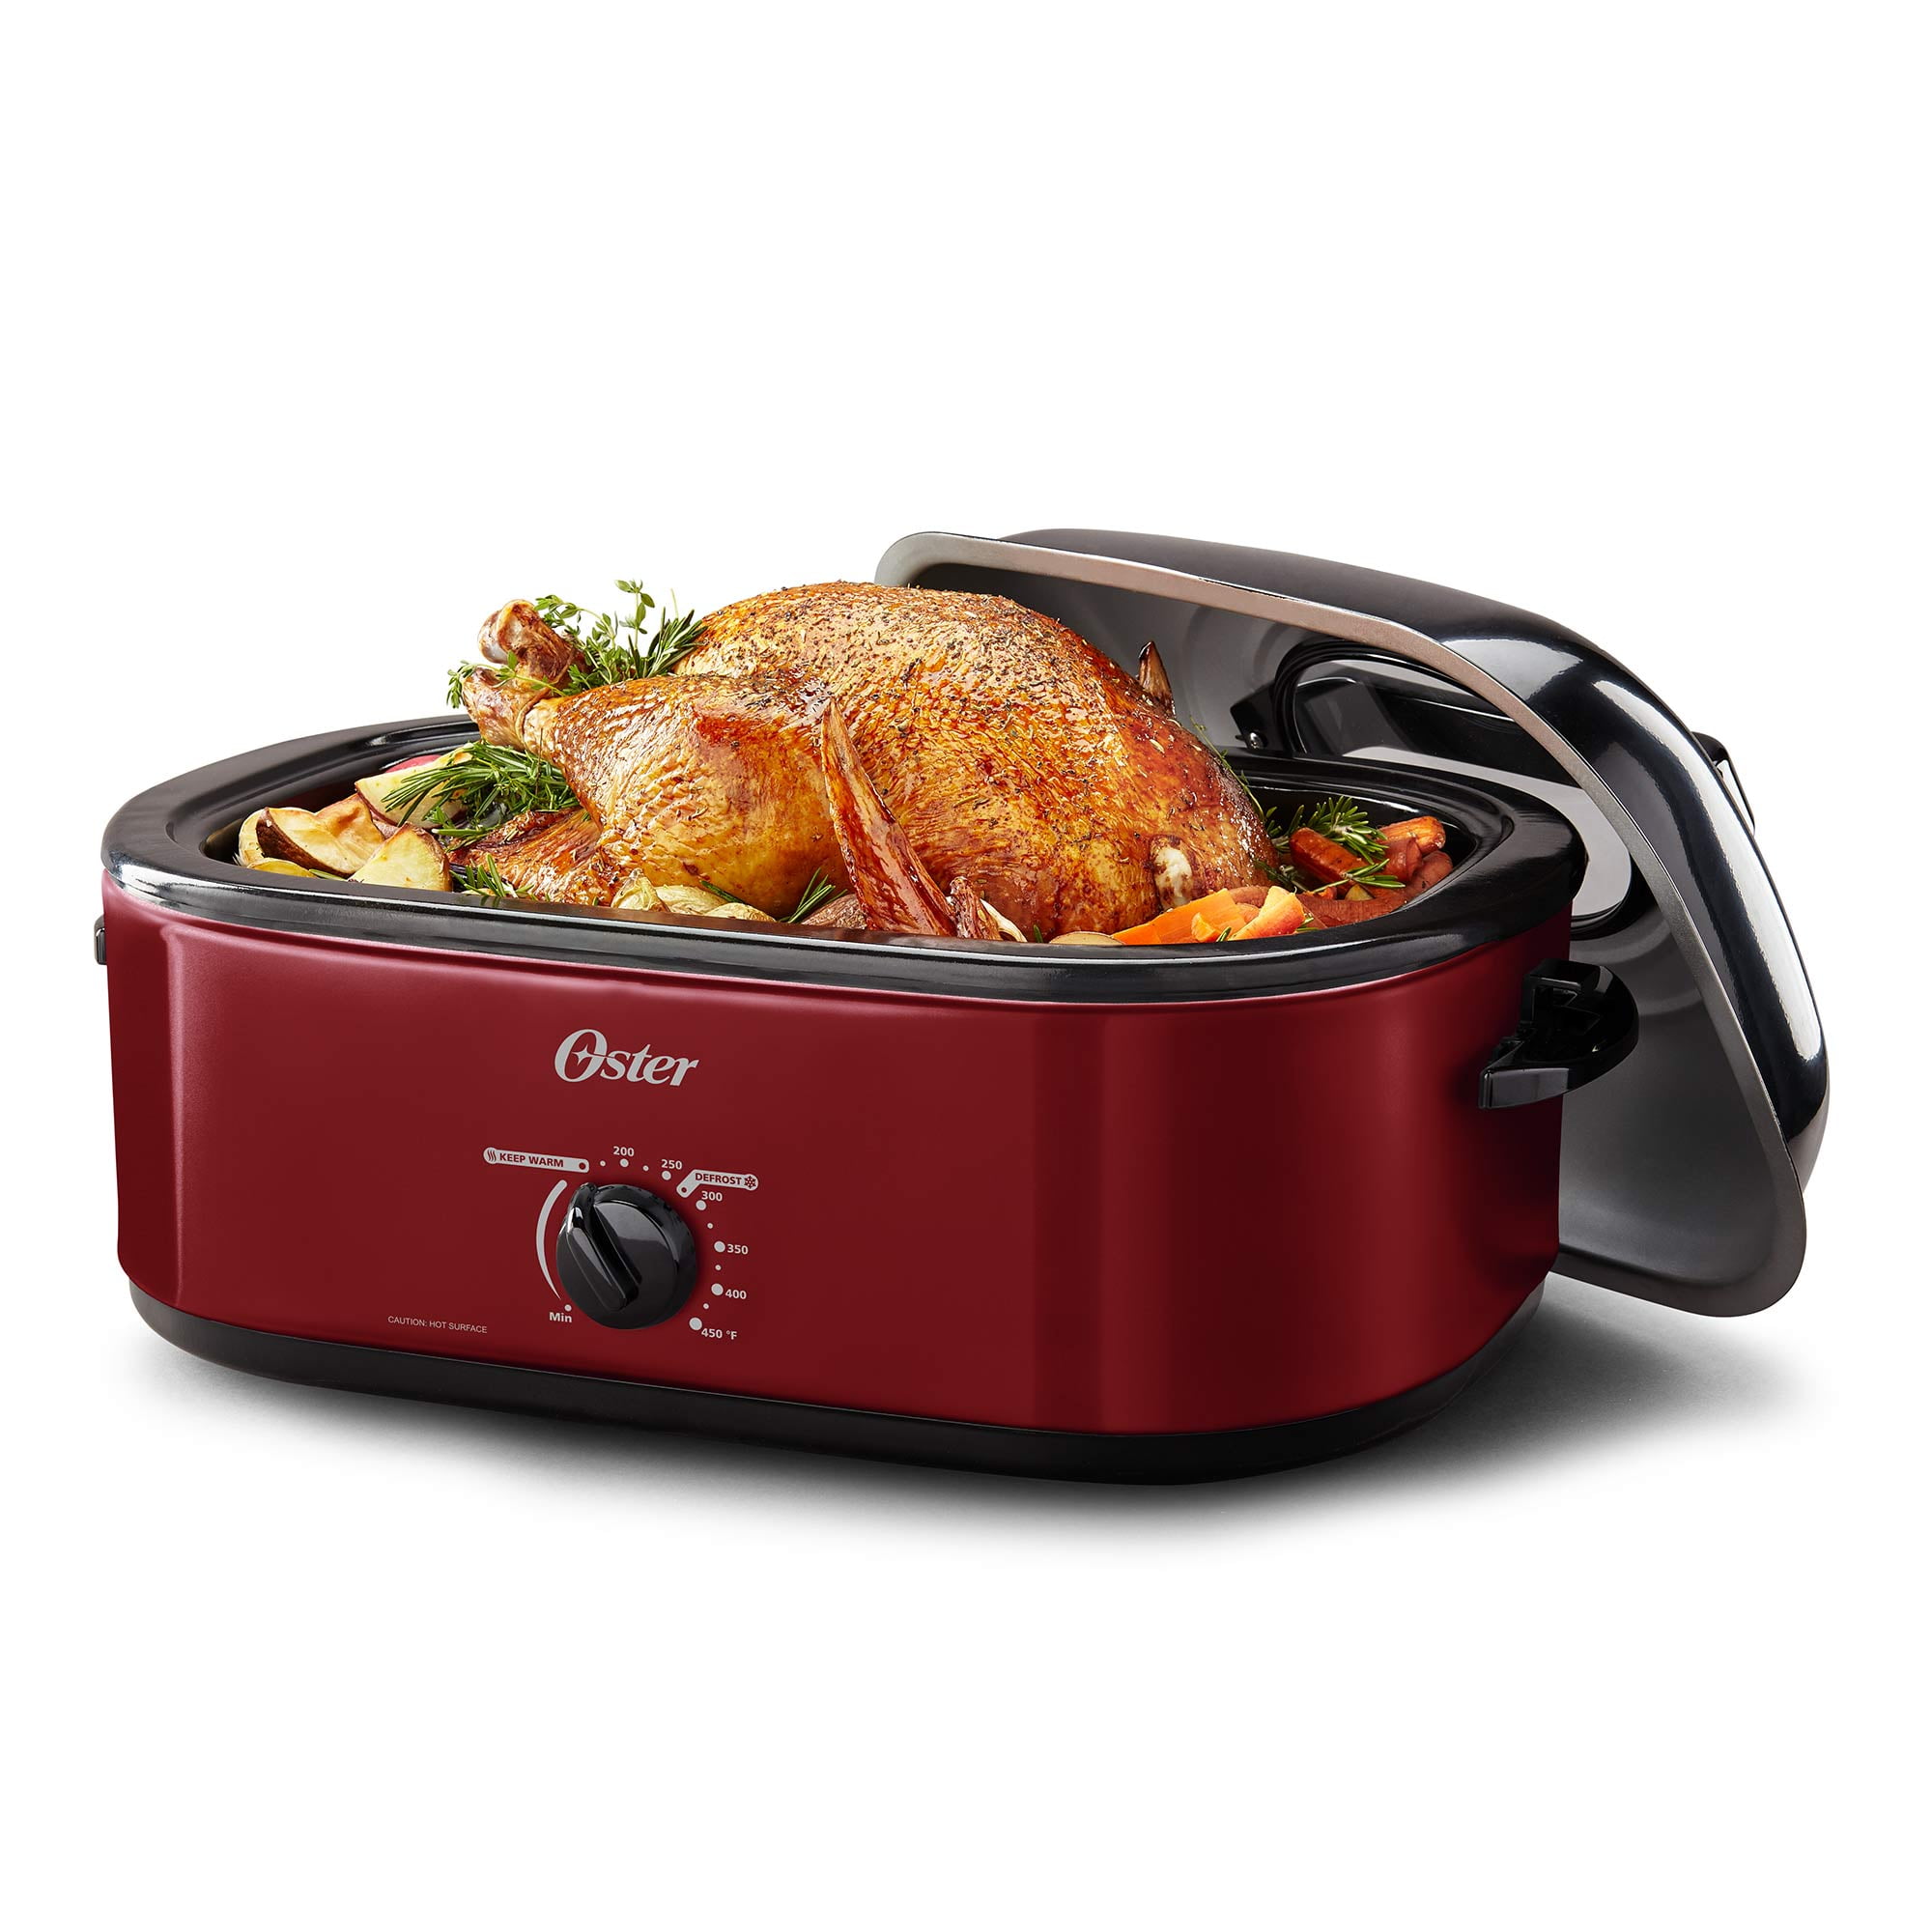 Elite Gourmet 18-Quart Electric Roaster with Lid, Red